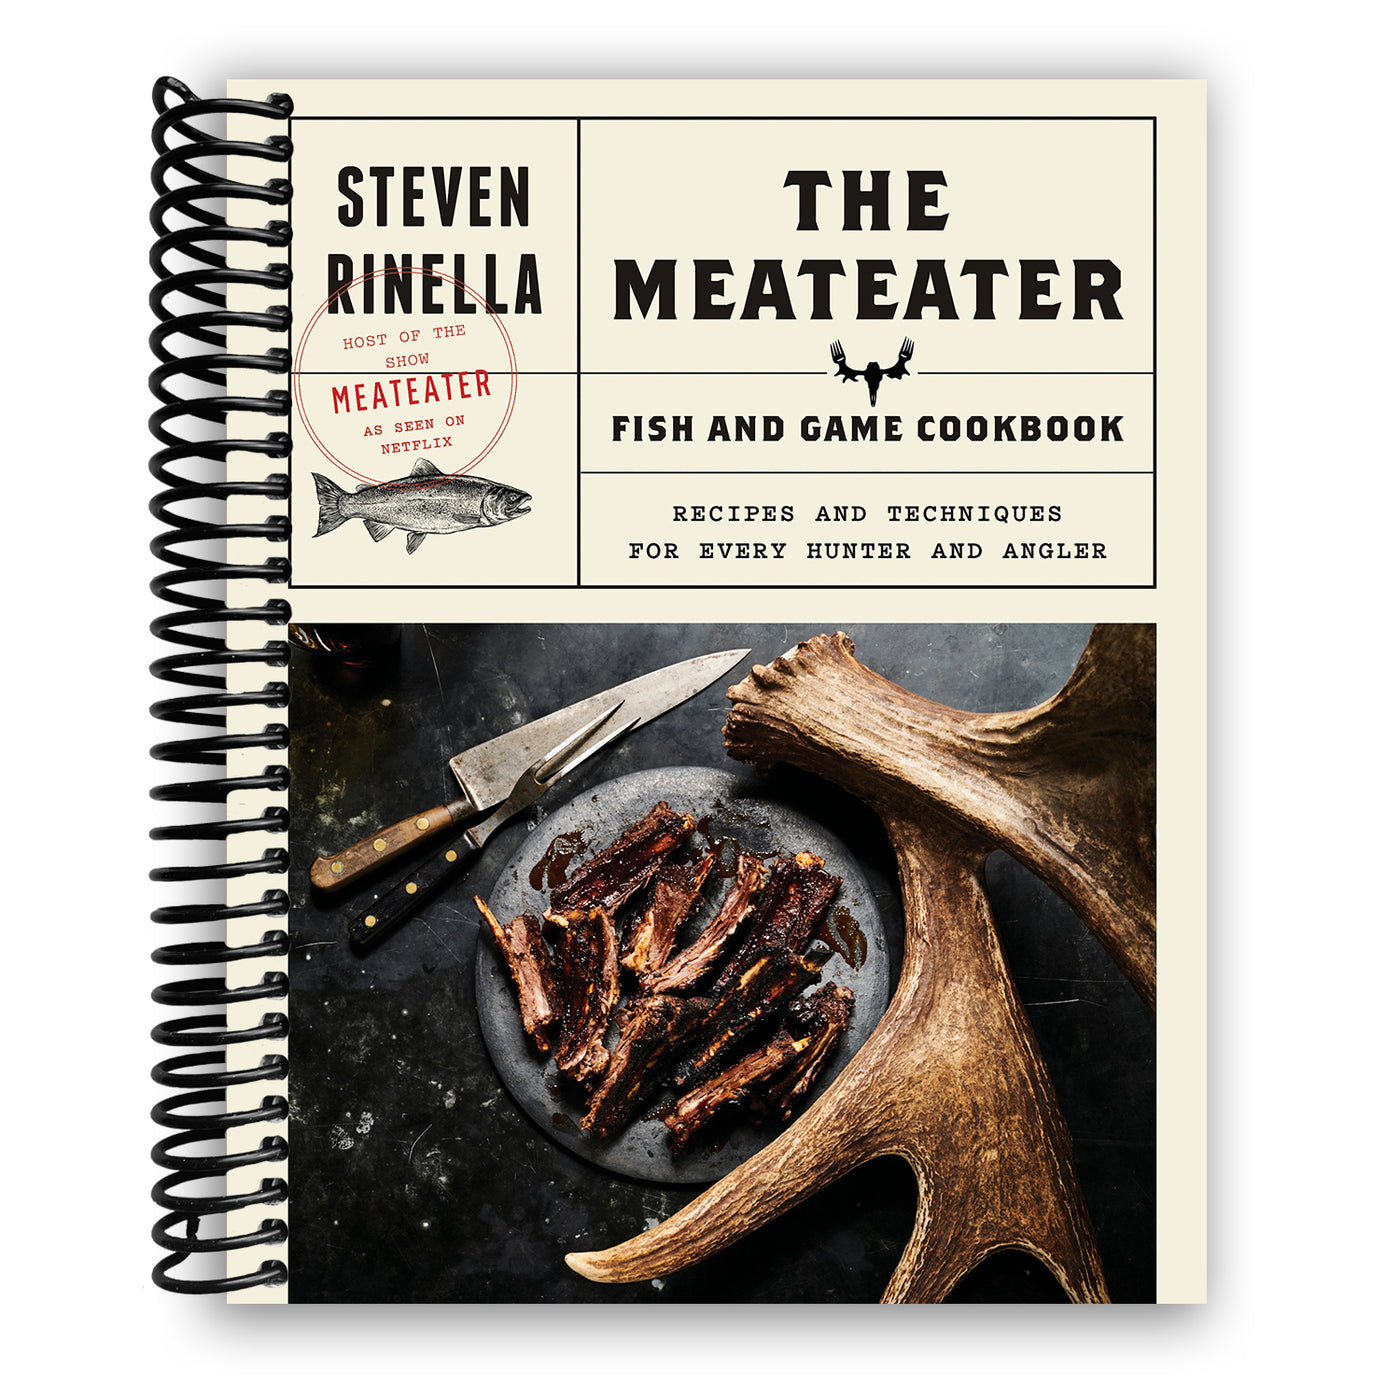 The MeatEater Fish and Game Cookbook: Recipes and Techniques for Every Hunter and Angler (Spiral Bound)